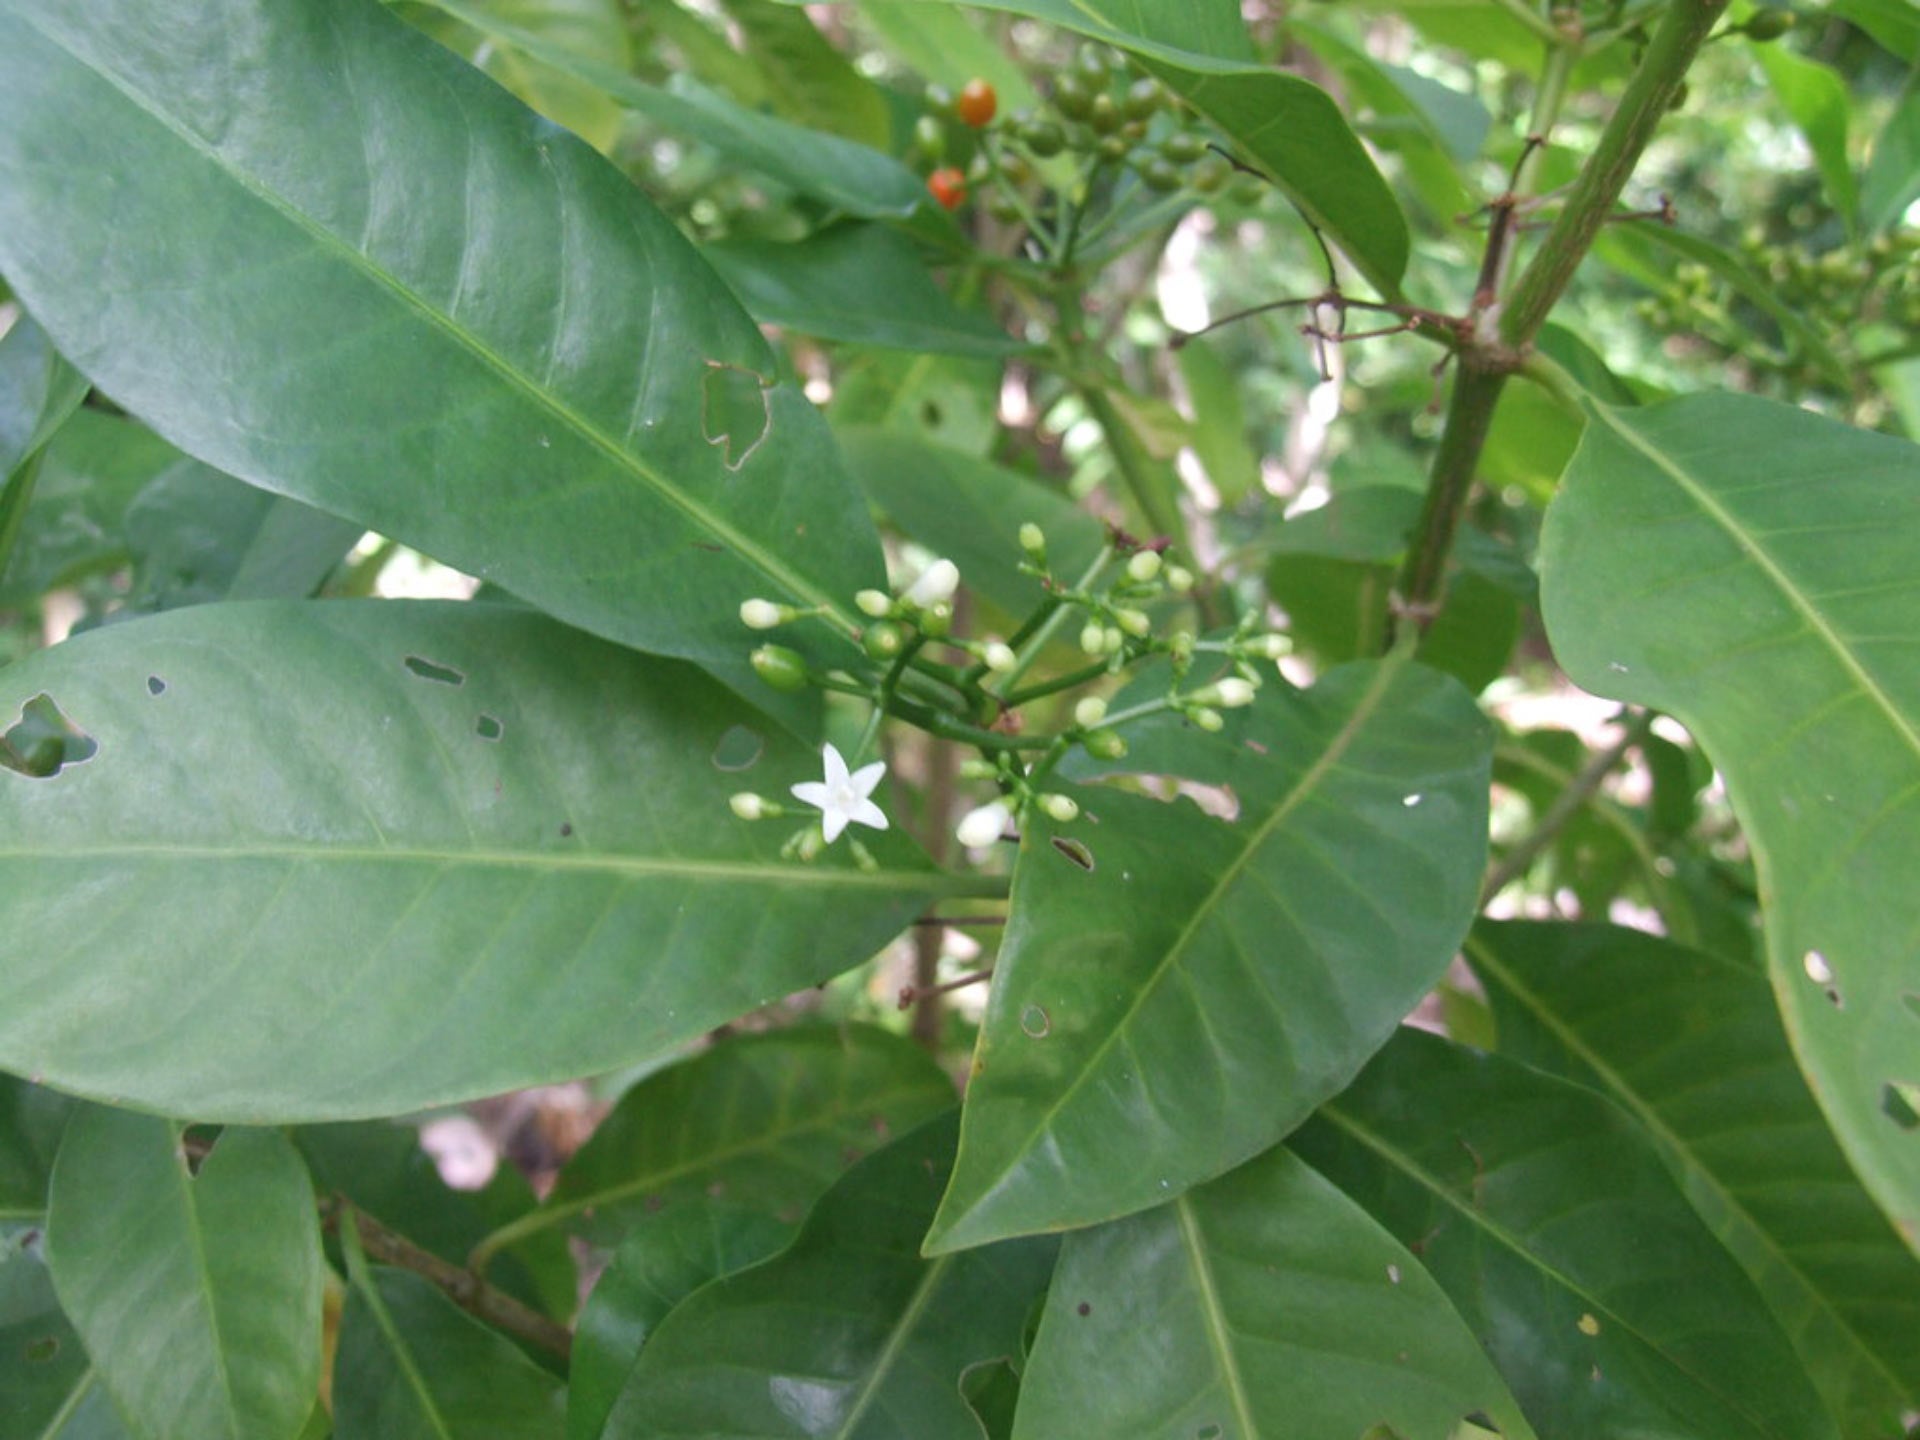 Matalafi is a small tree about 2m in height with small white flowers and glossy red berries